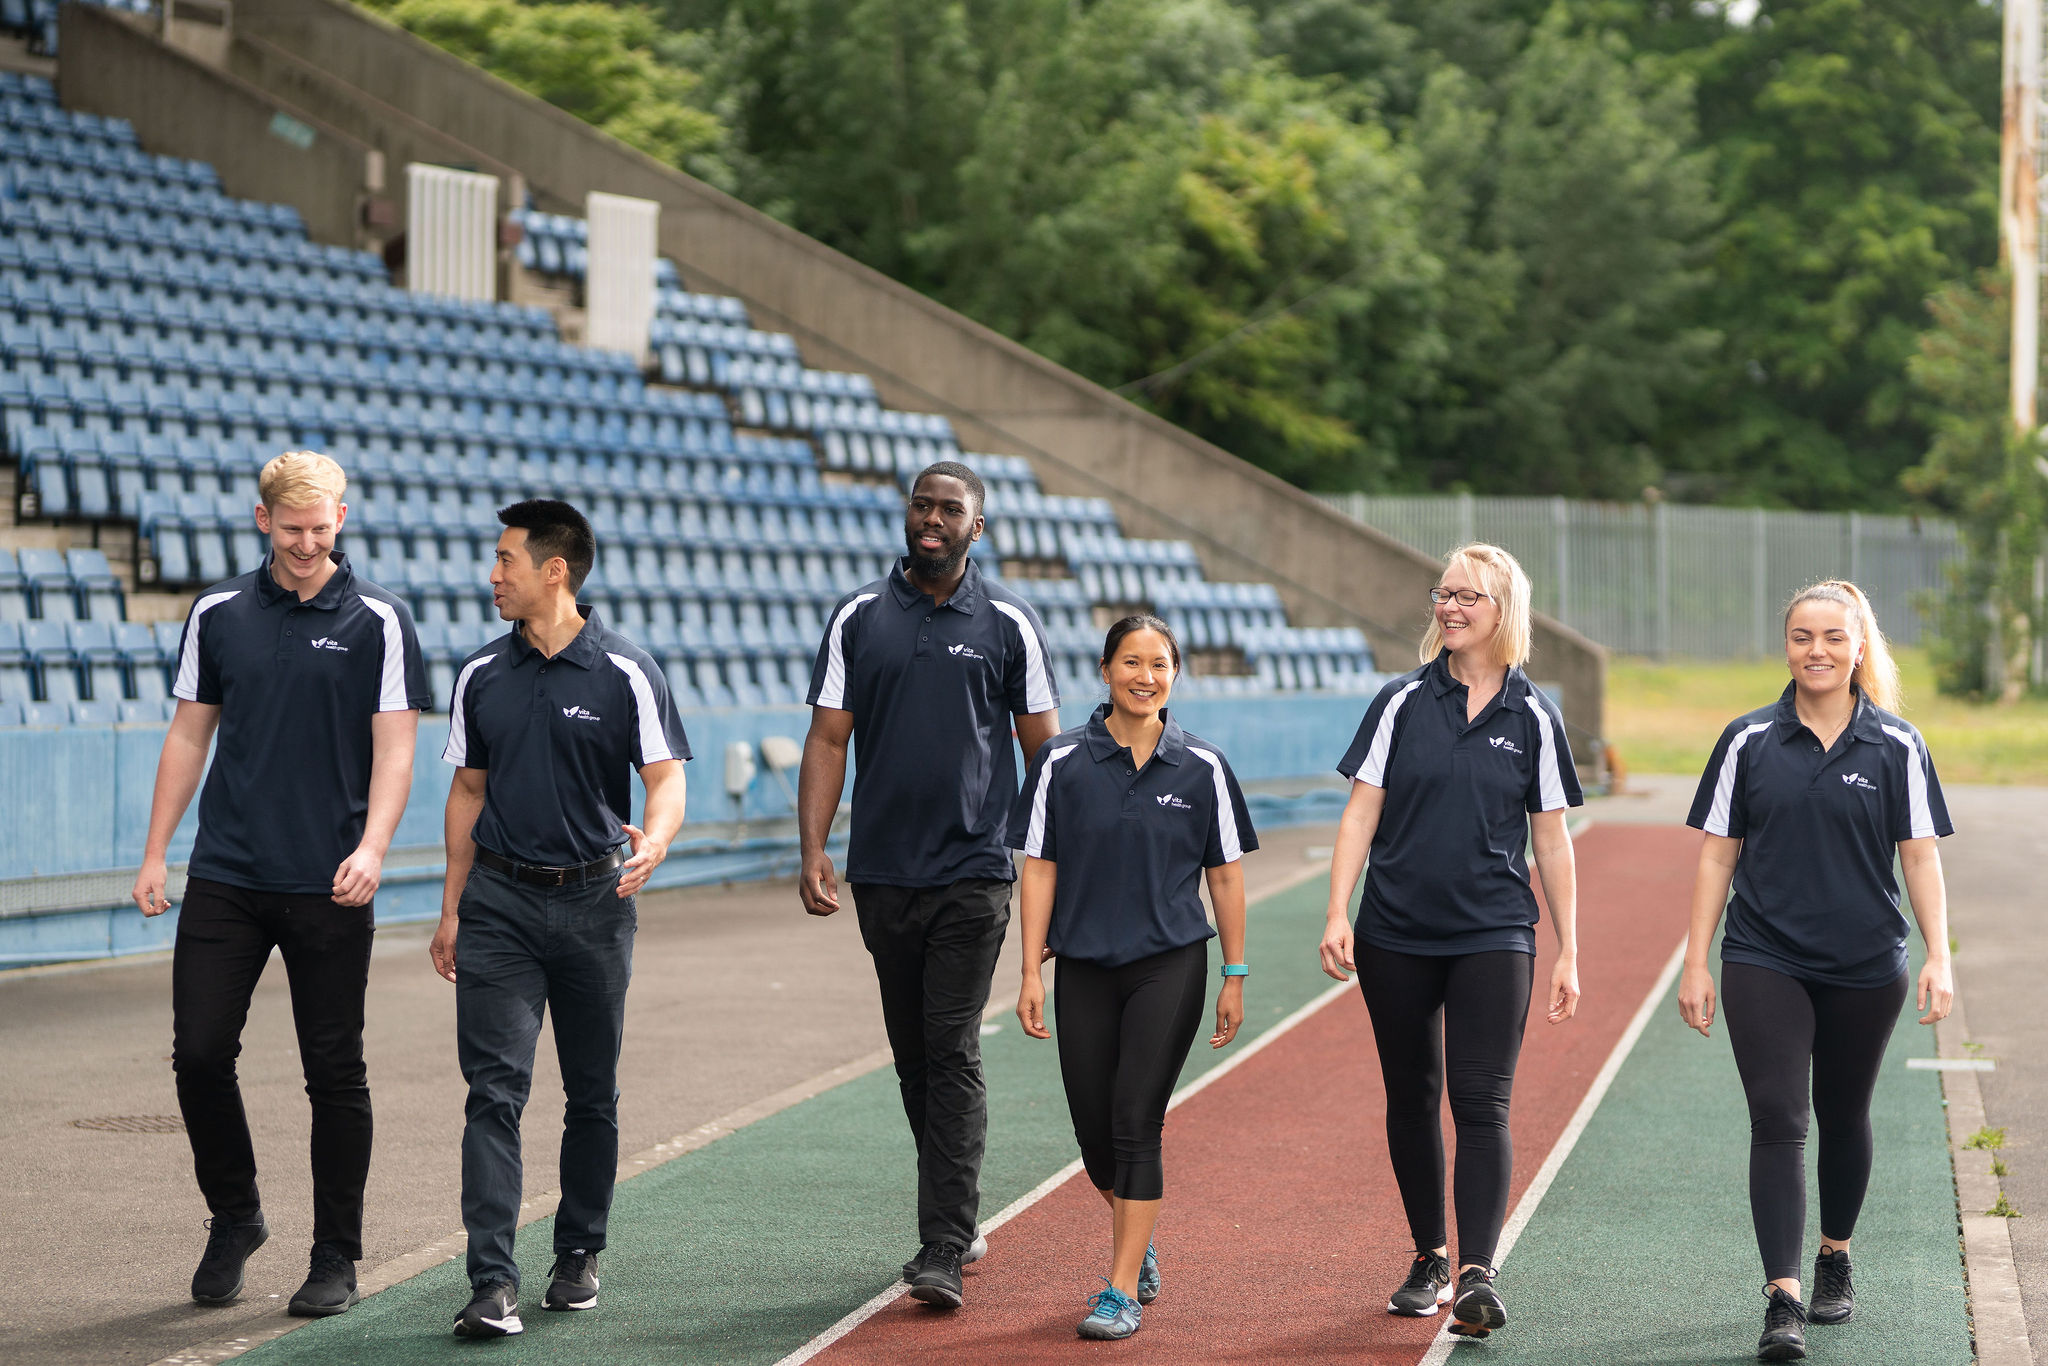 Six staff members walk together on a running track smiling and talking